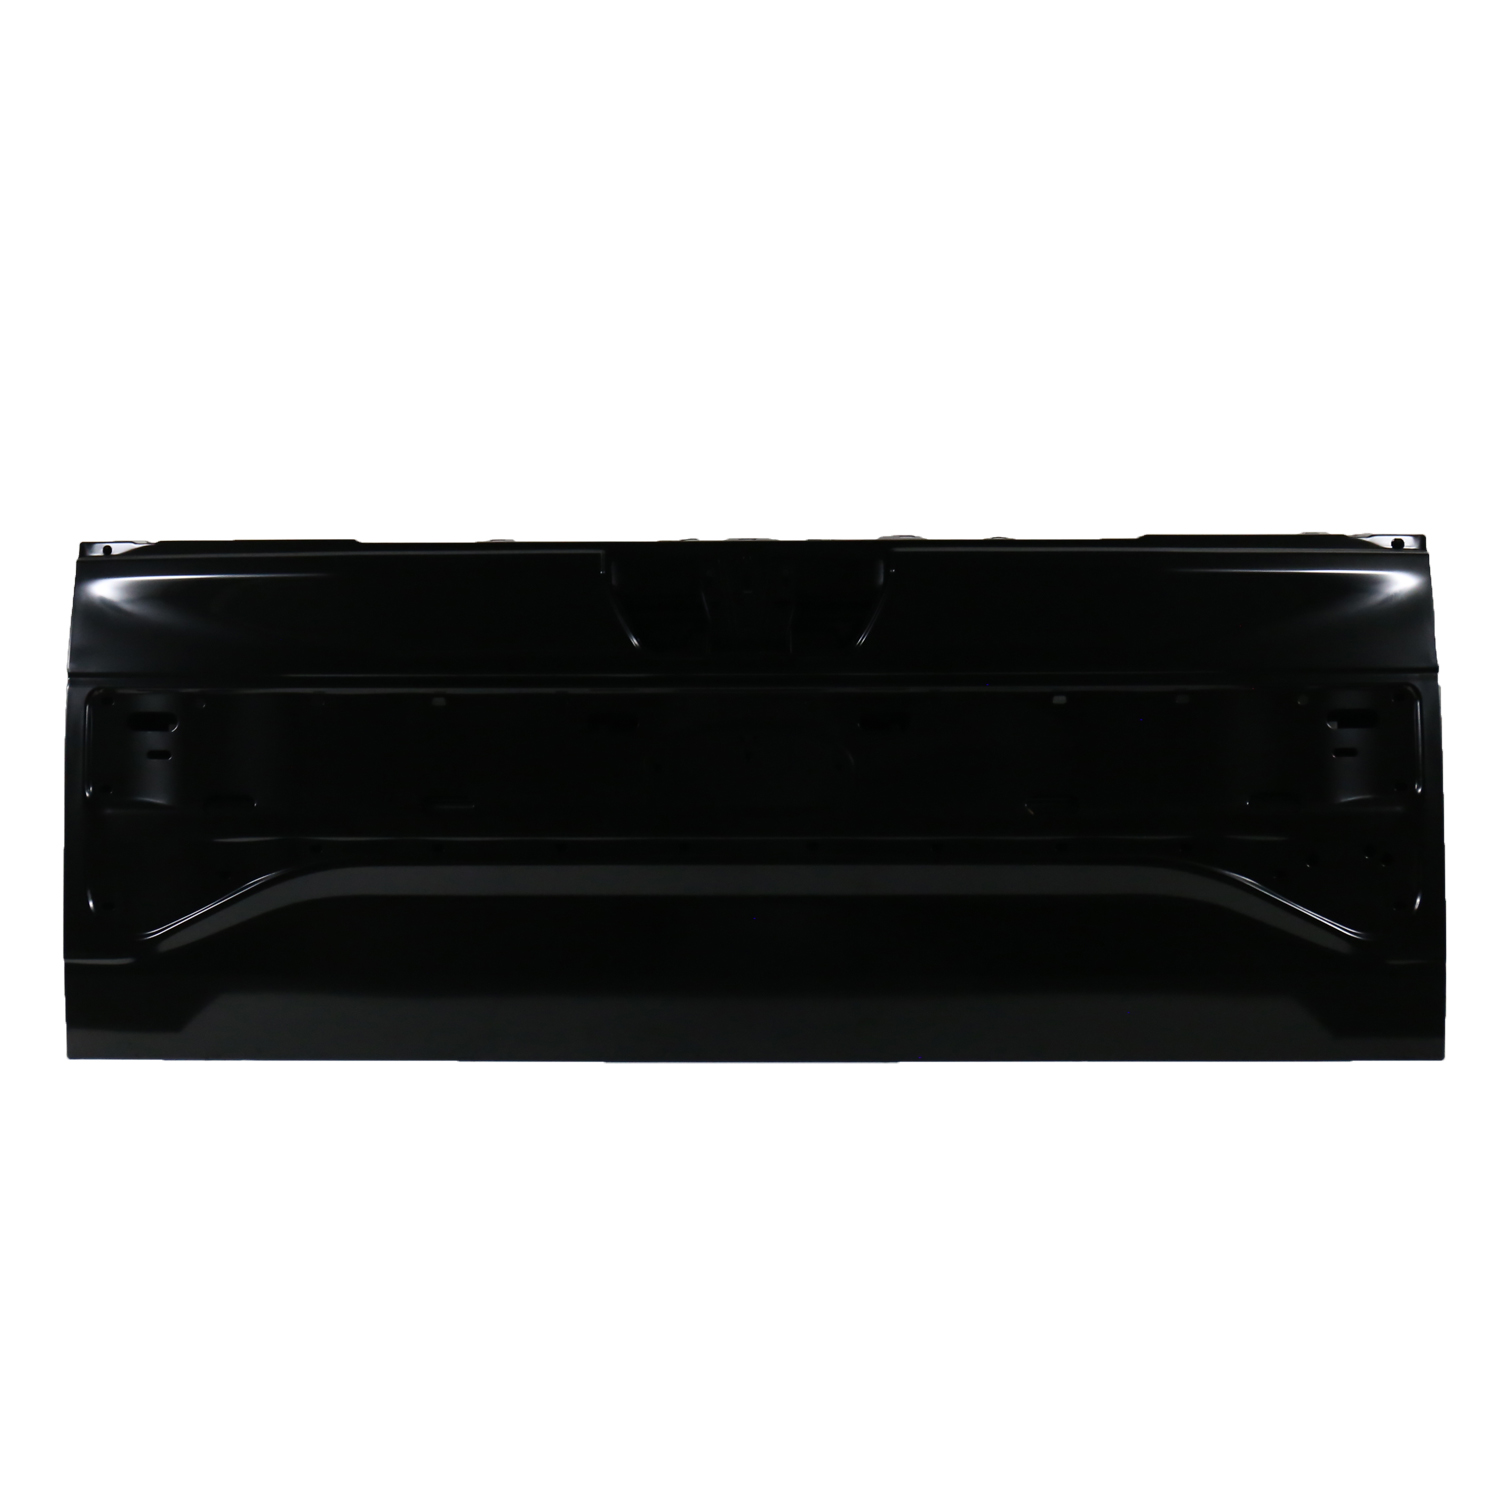 Aftermarket TAILGATES for FORD - F-150, F-150,15-17,Rear gate shell